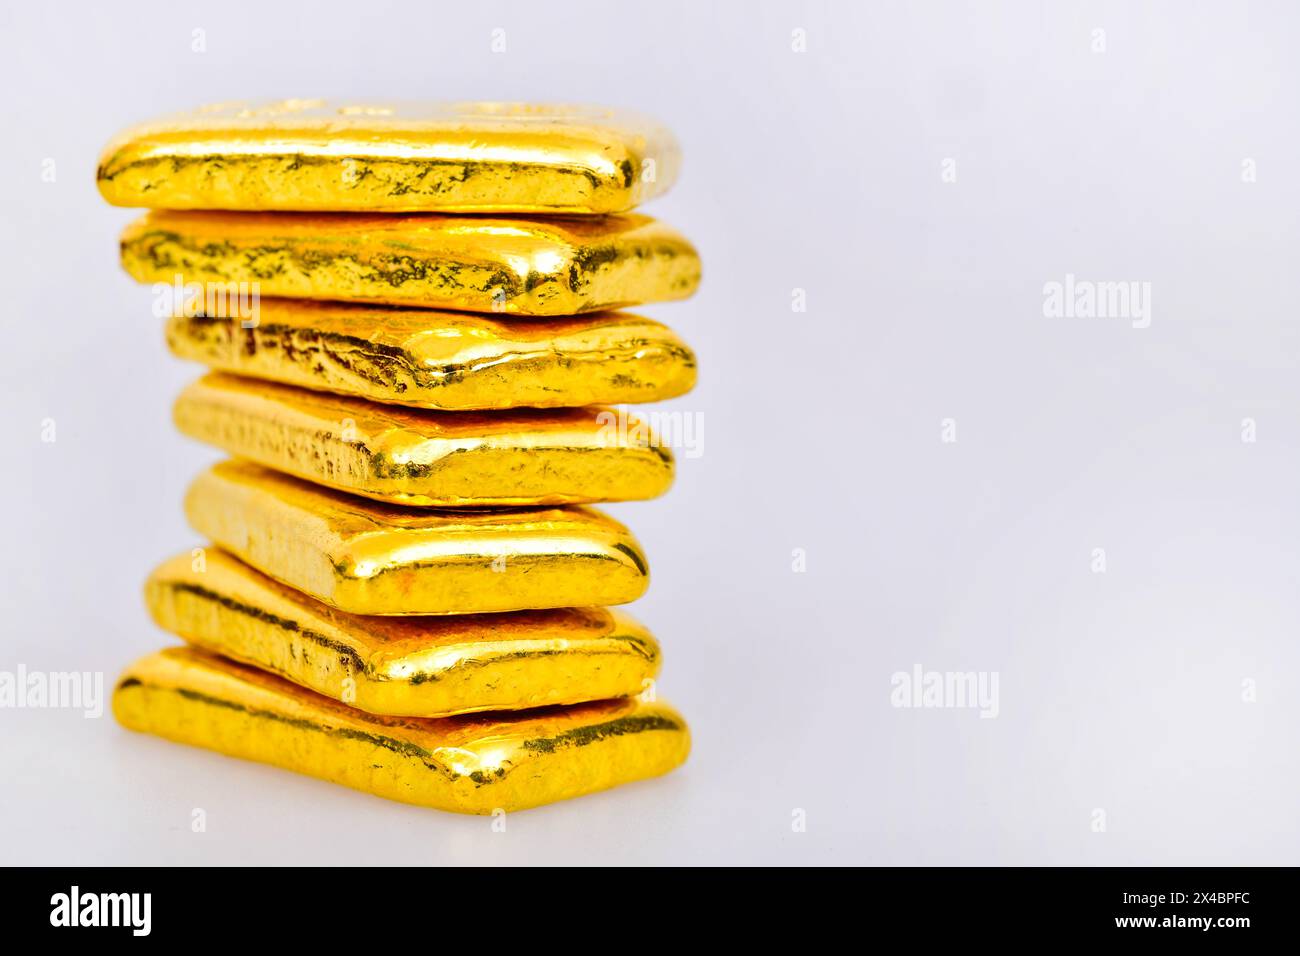 Close up photo a gold bars on white background Stock Photo